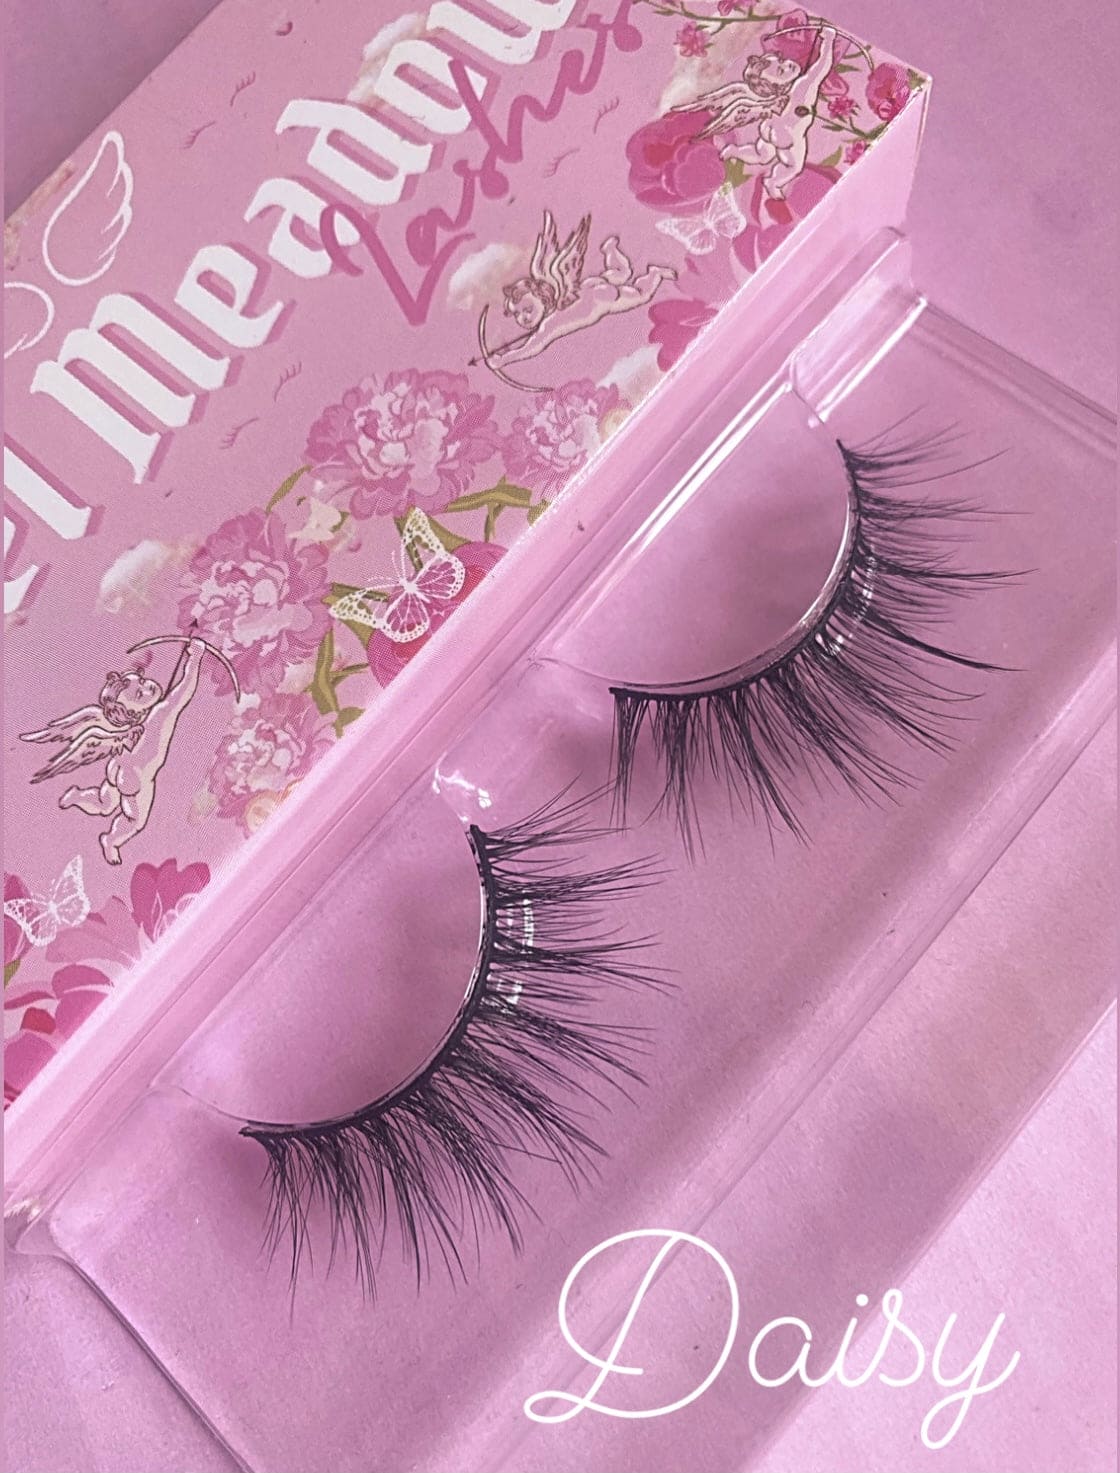 Angel Meadow Lashes